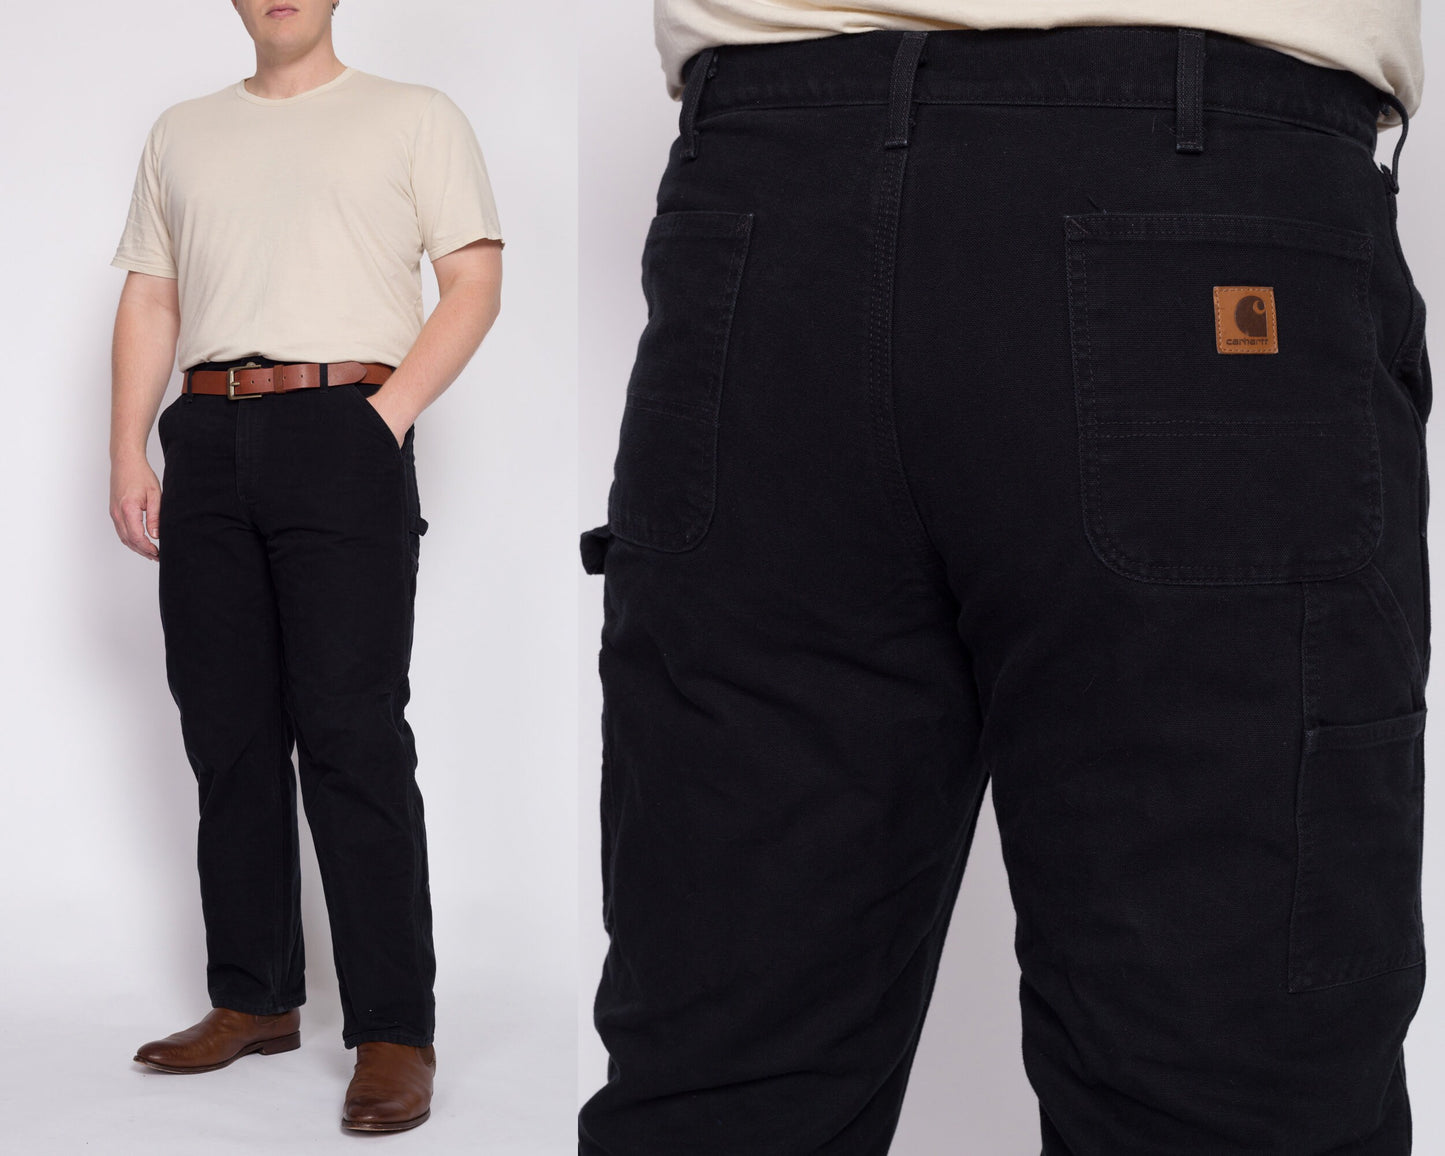 90s Carhartt Black Flannel Lined Workwear Pants - 38x32 | Vintage Utility Straight Leg Duck Canvas Dungarees